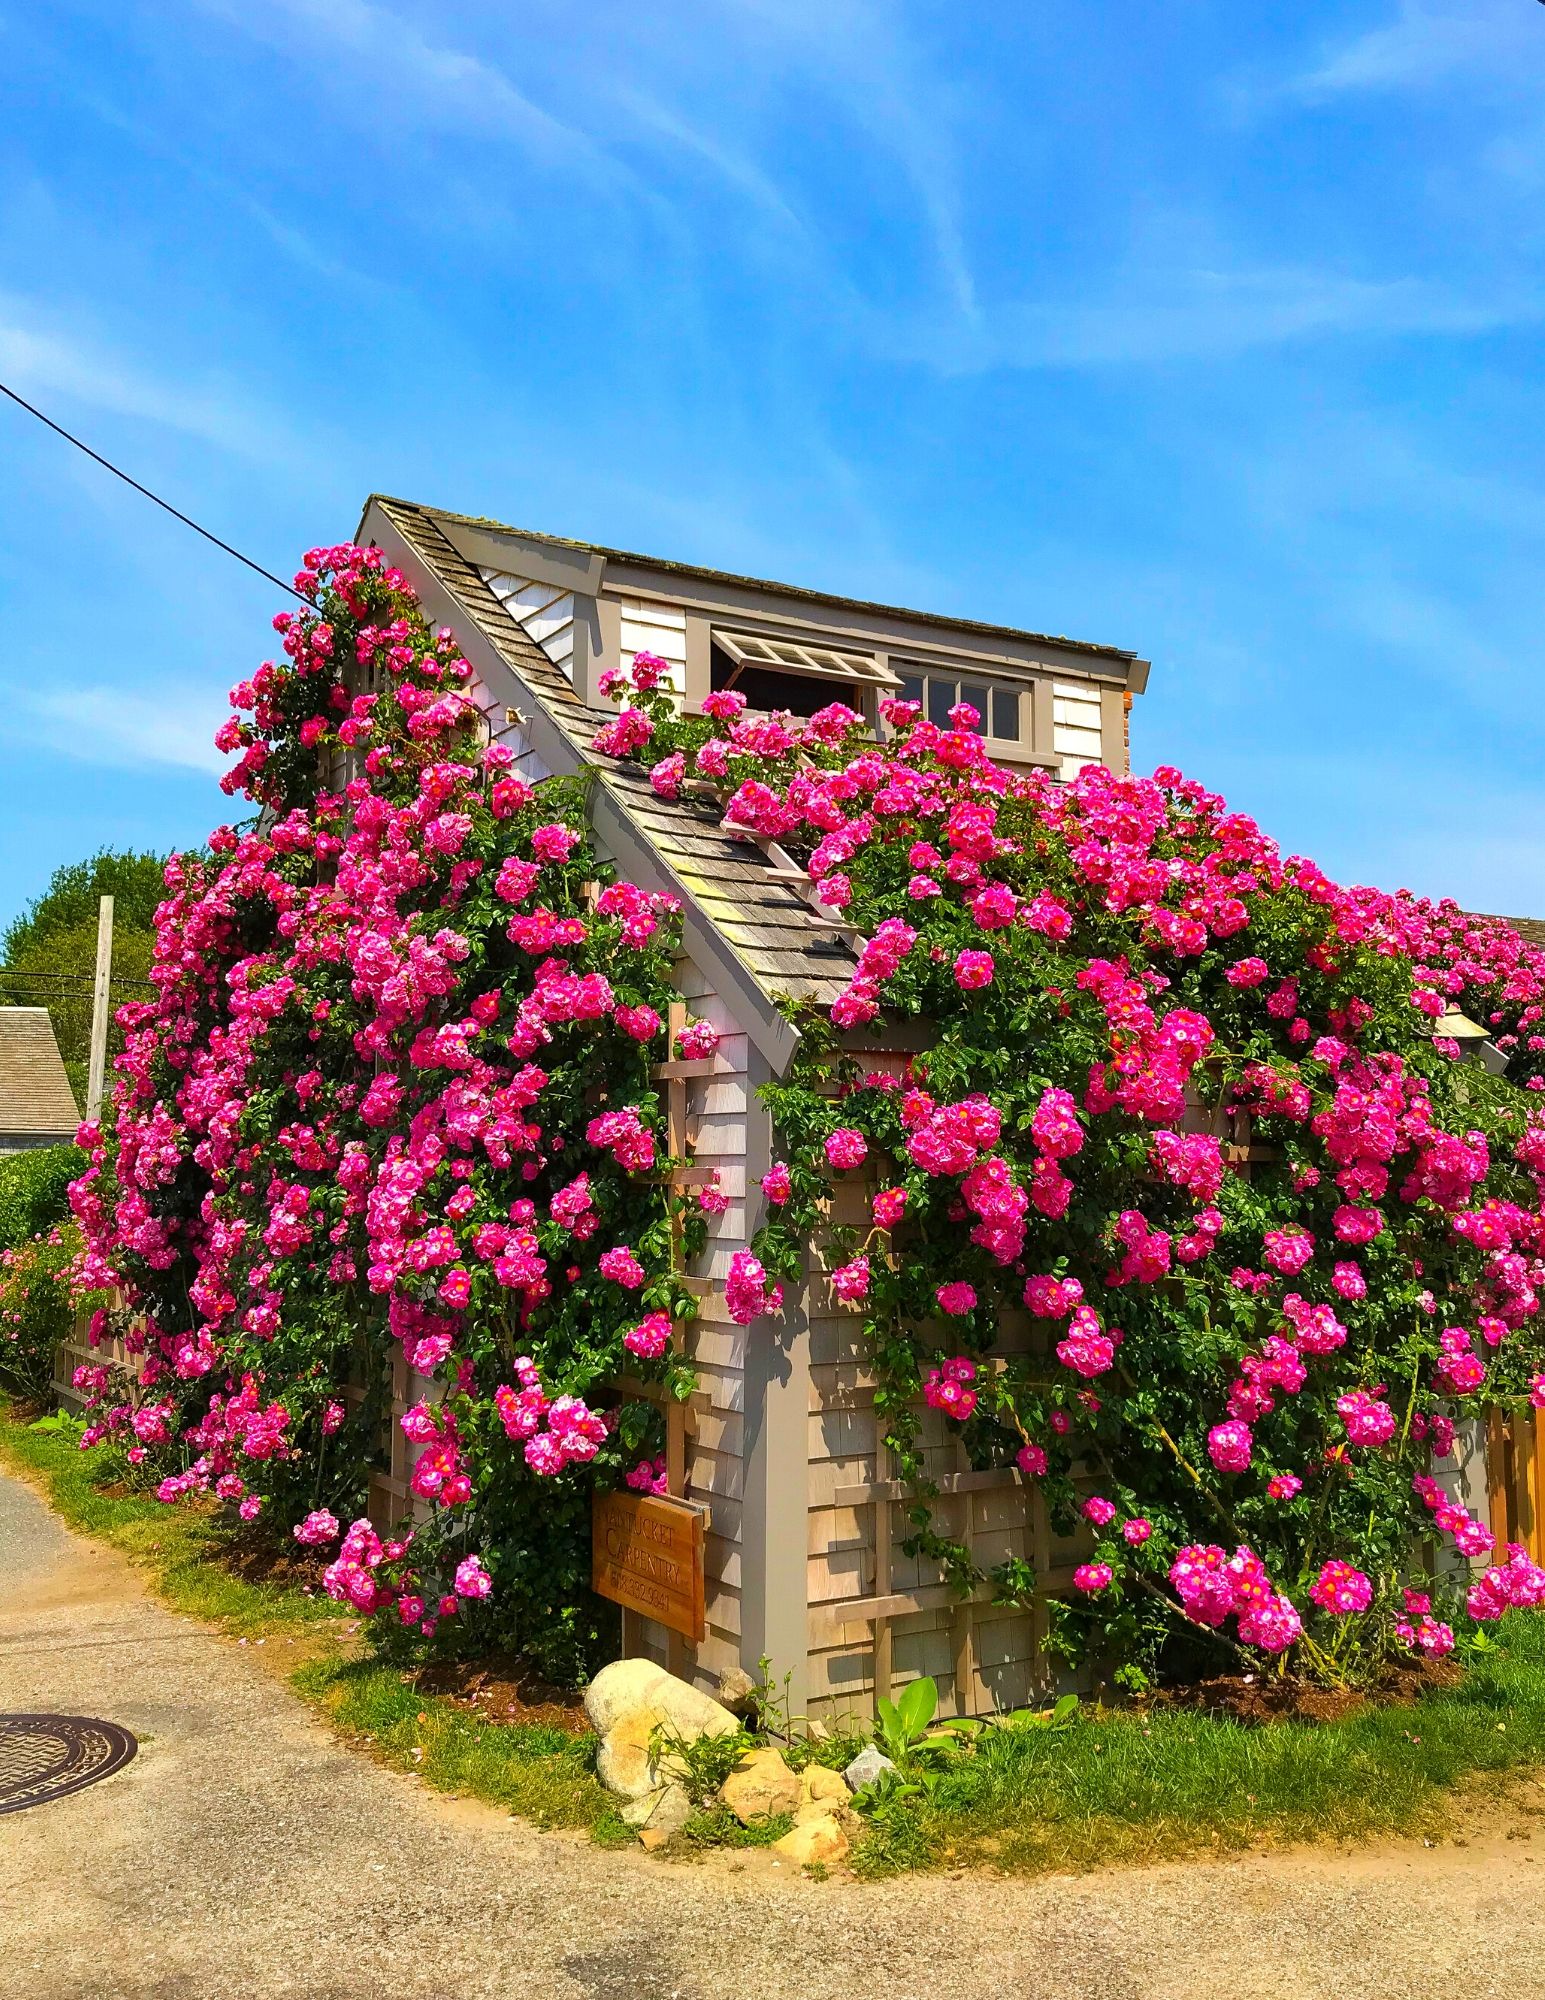 Nantucket Rose Covered Cottages in Sconset-13